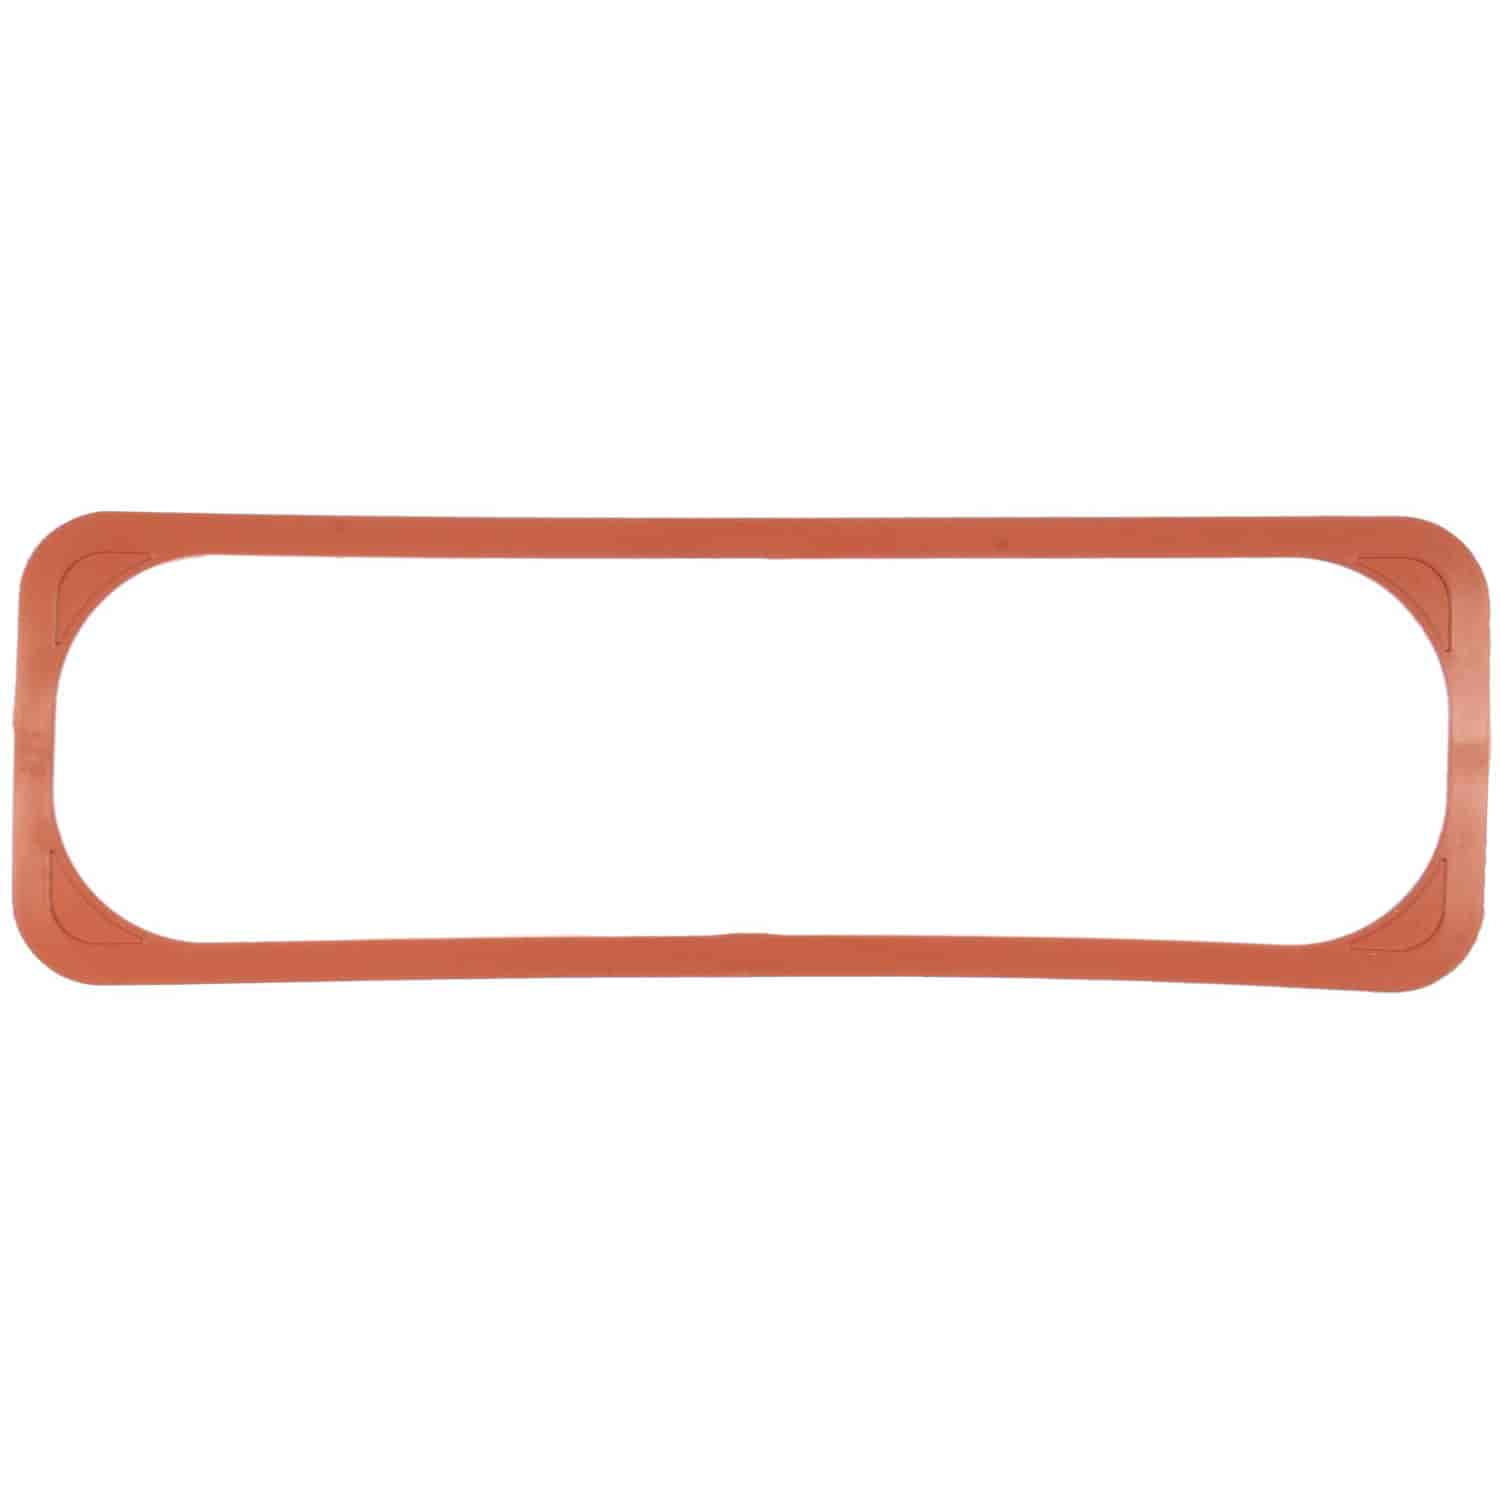 Single Valve Cover Gasket 1985-1993 Chevy V6 4.3L in Molded Rubber